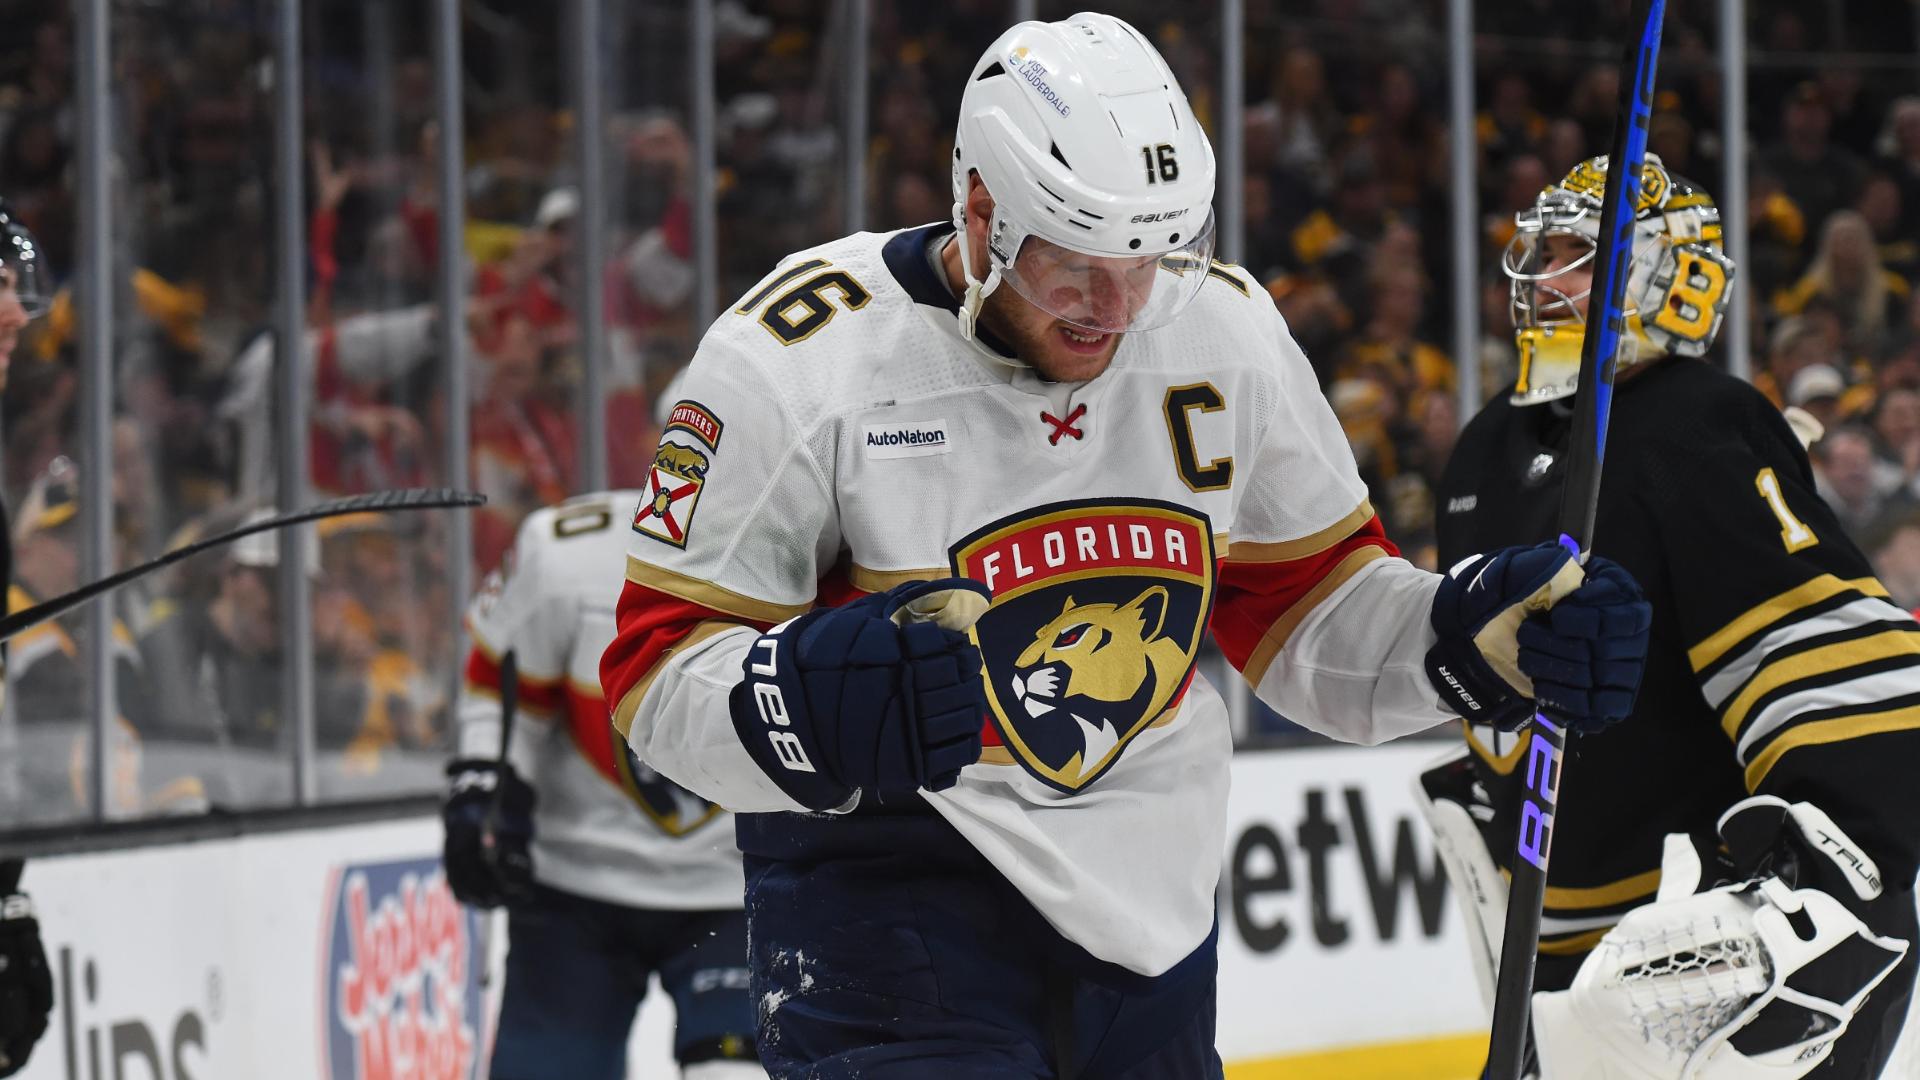 Panthers score 3 unanswered goals to take 3-1 series lead vs. Bruins